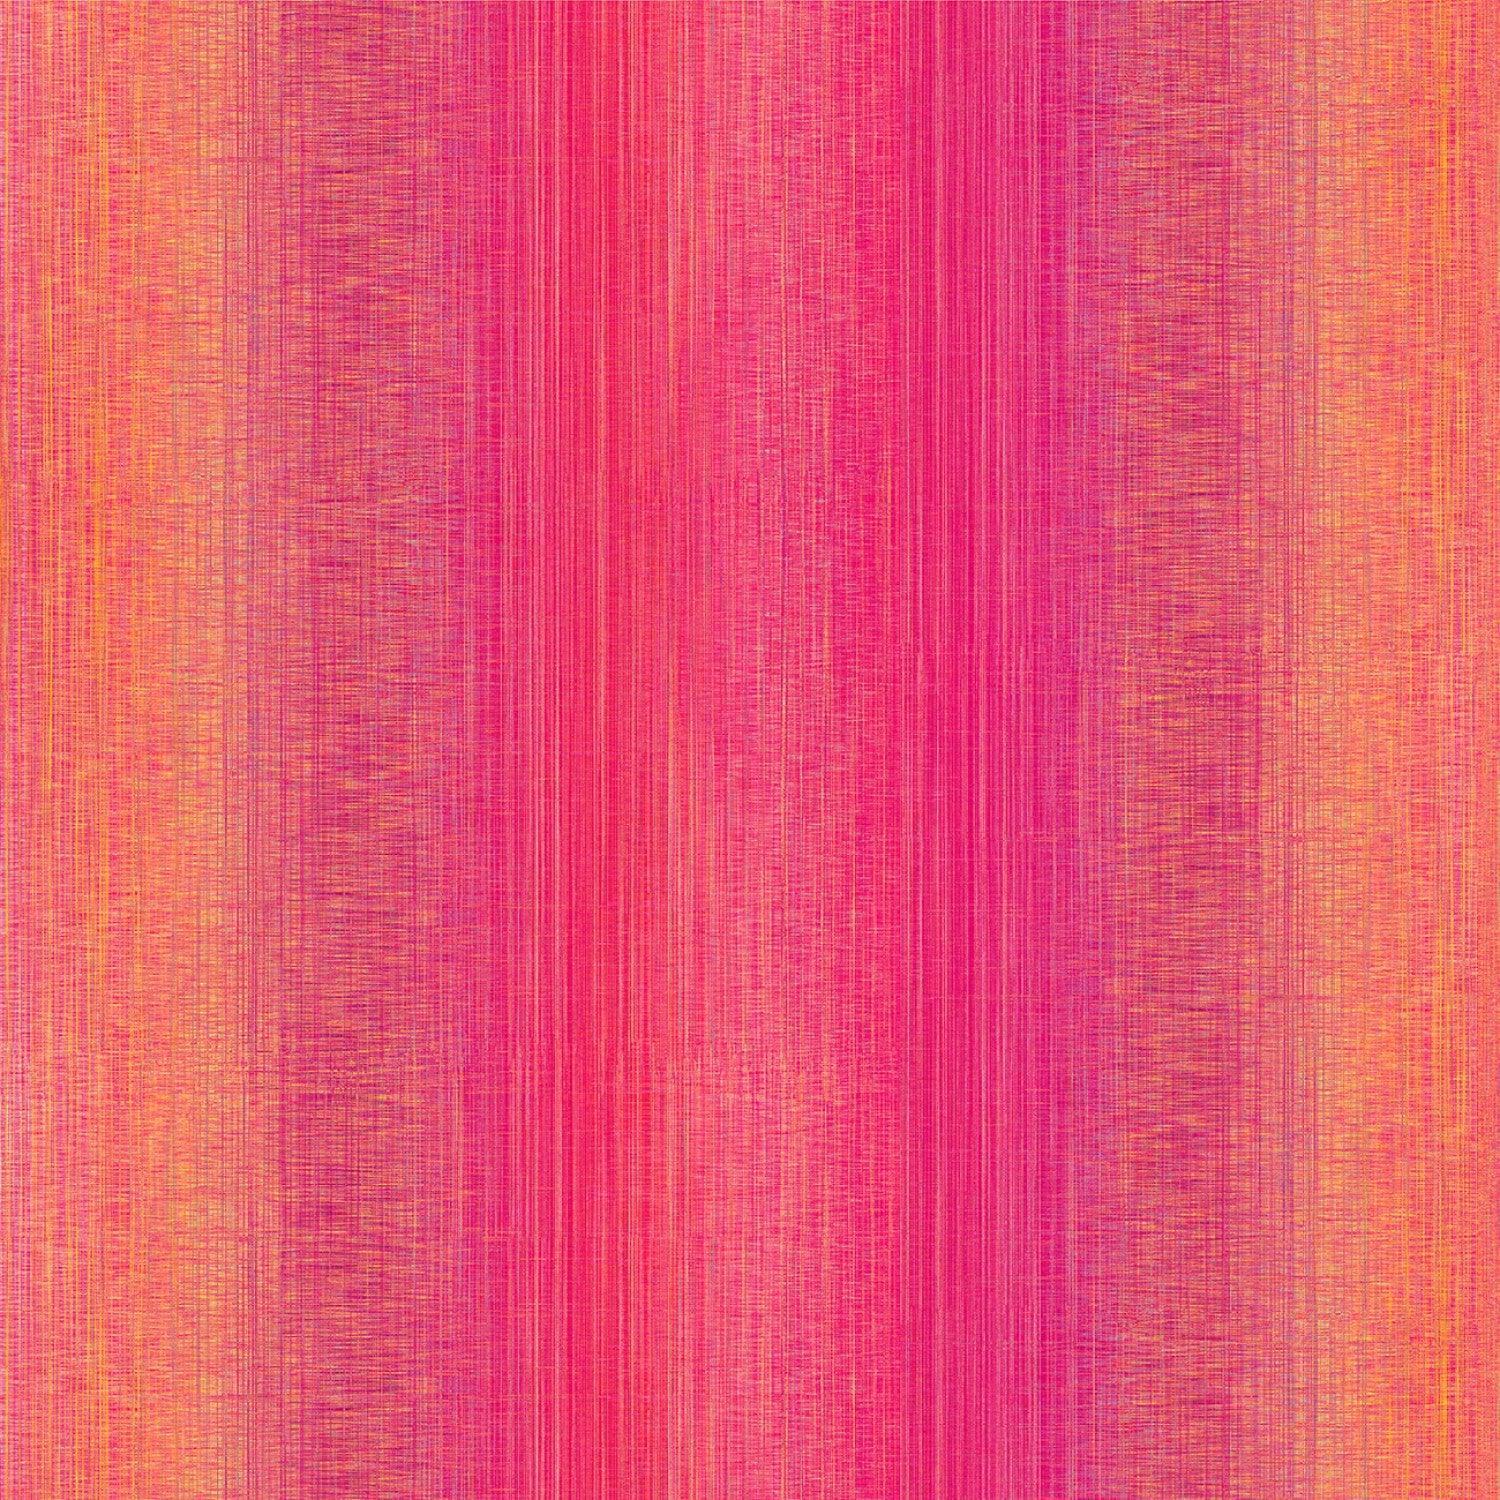 Ombre - Orange/Pink - 108" Wide - P & B Textiles - Kawartha Quilting and Sewing LTD.